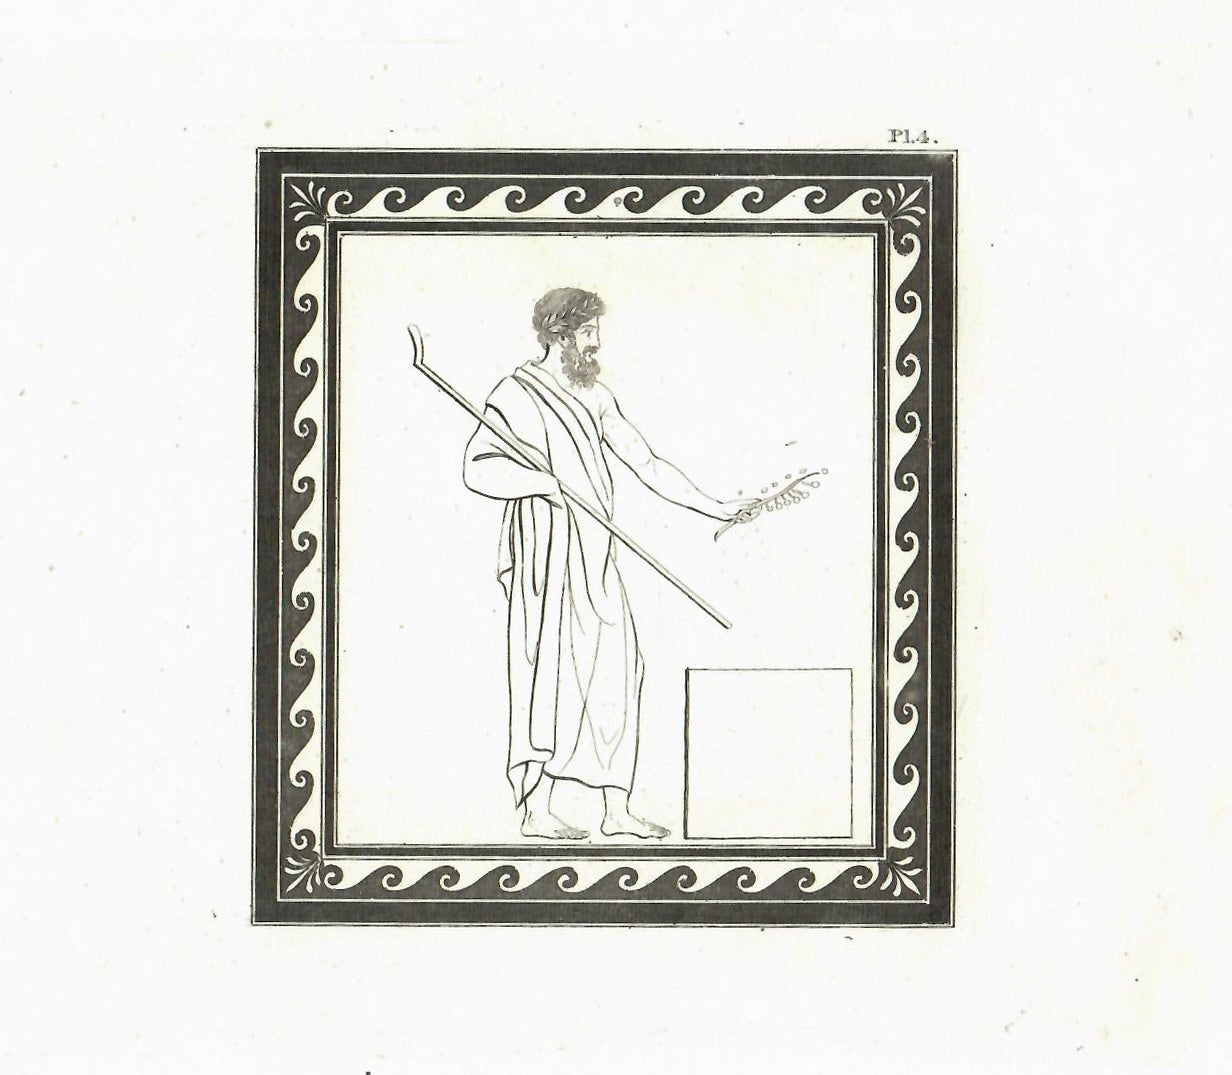 Item #29160 [An Original Engraving From] SIR WILLIAM HAMILTON'S OUTLINES FROM THE FIGURES AND COMPOSITIONS UPON THE Greek, Roman, AND ETRUSCAN VASES. Antiquities, Art Prints, Sir William Hamilton.